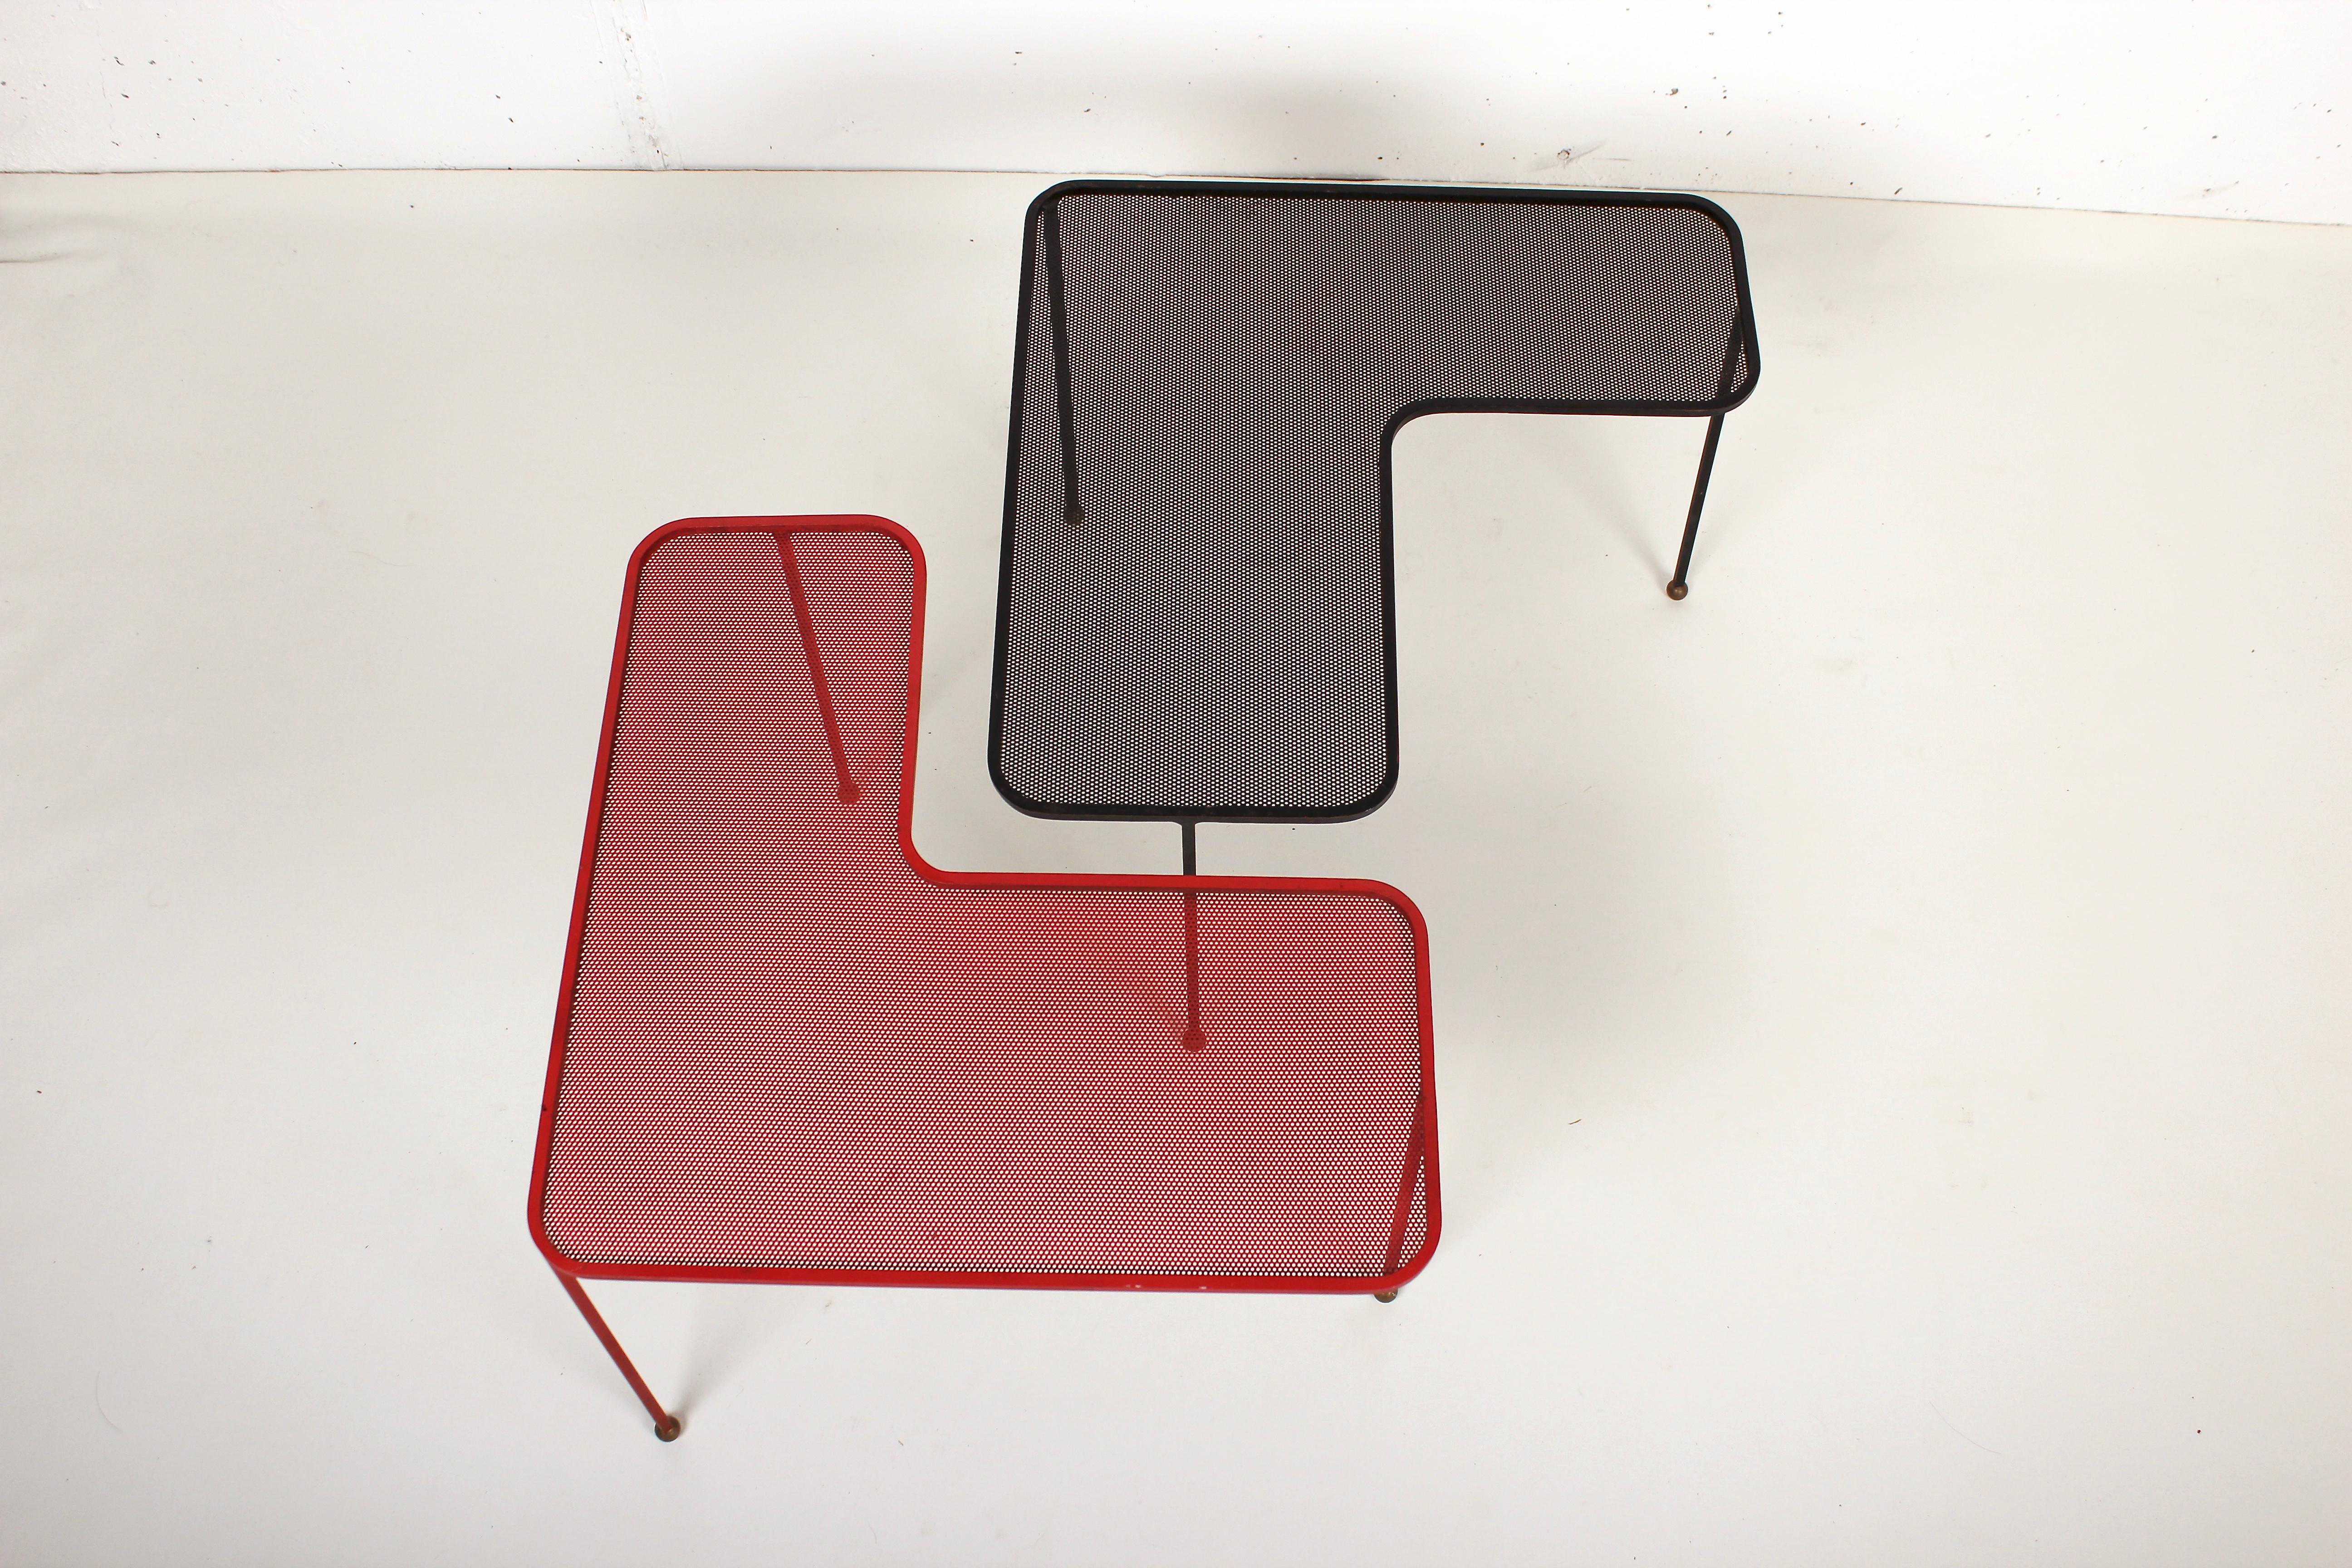 French Pair of Domino Tables by Mathieu Matégot, 1953 For Sale